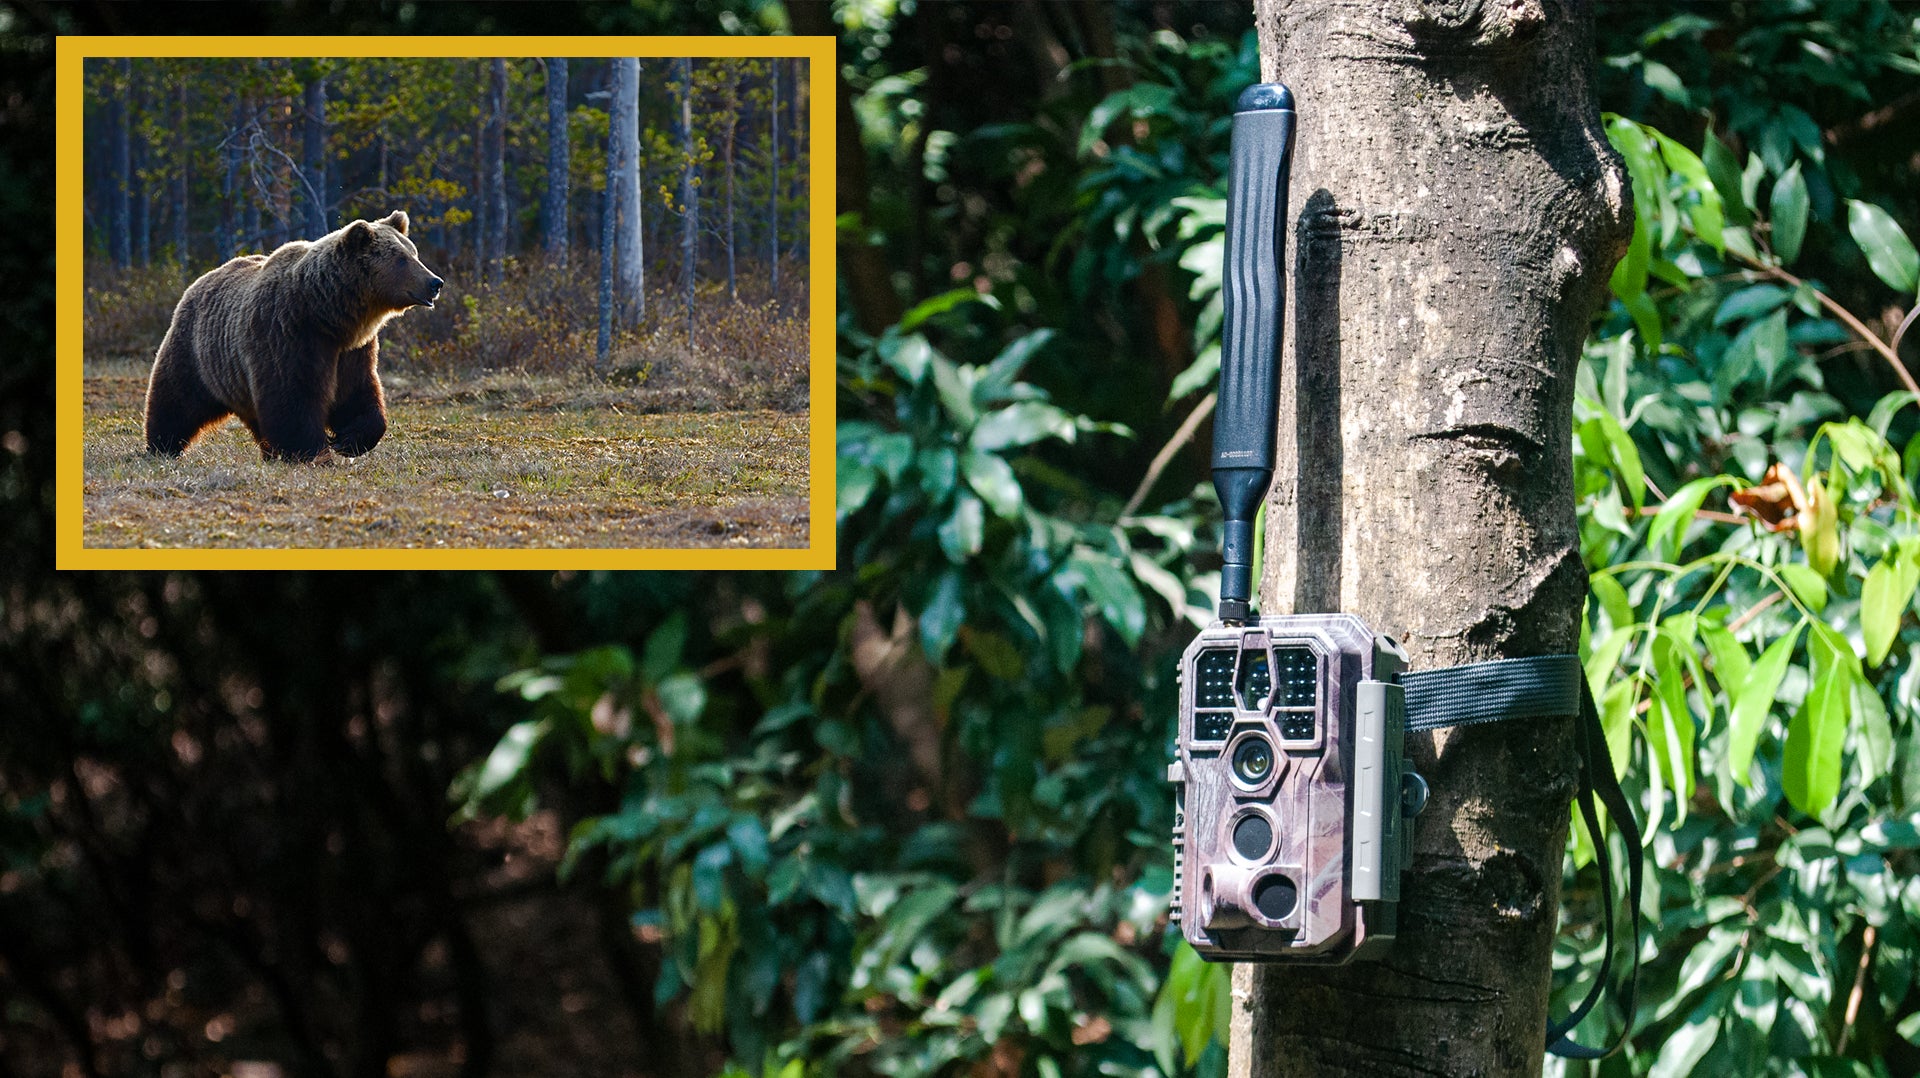 Benefits of using GardePro trail cameras for research